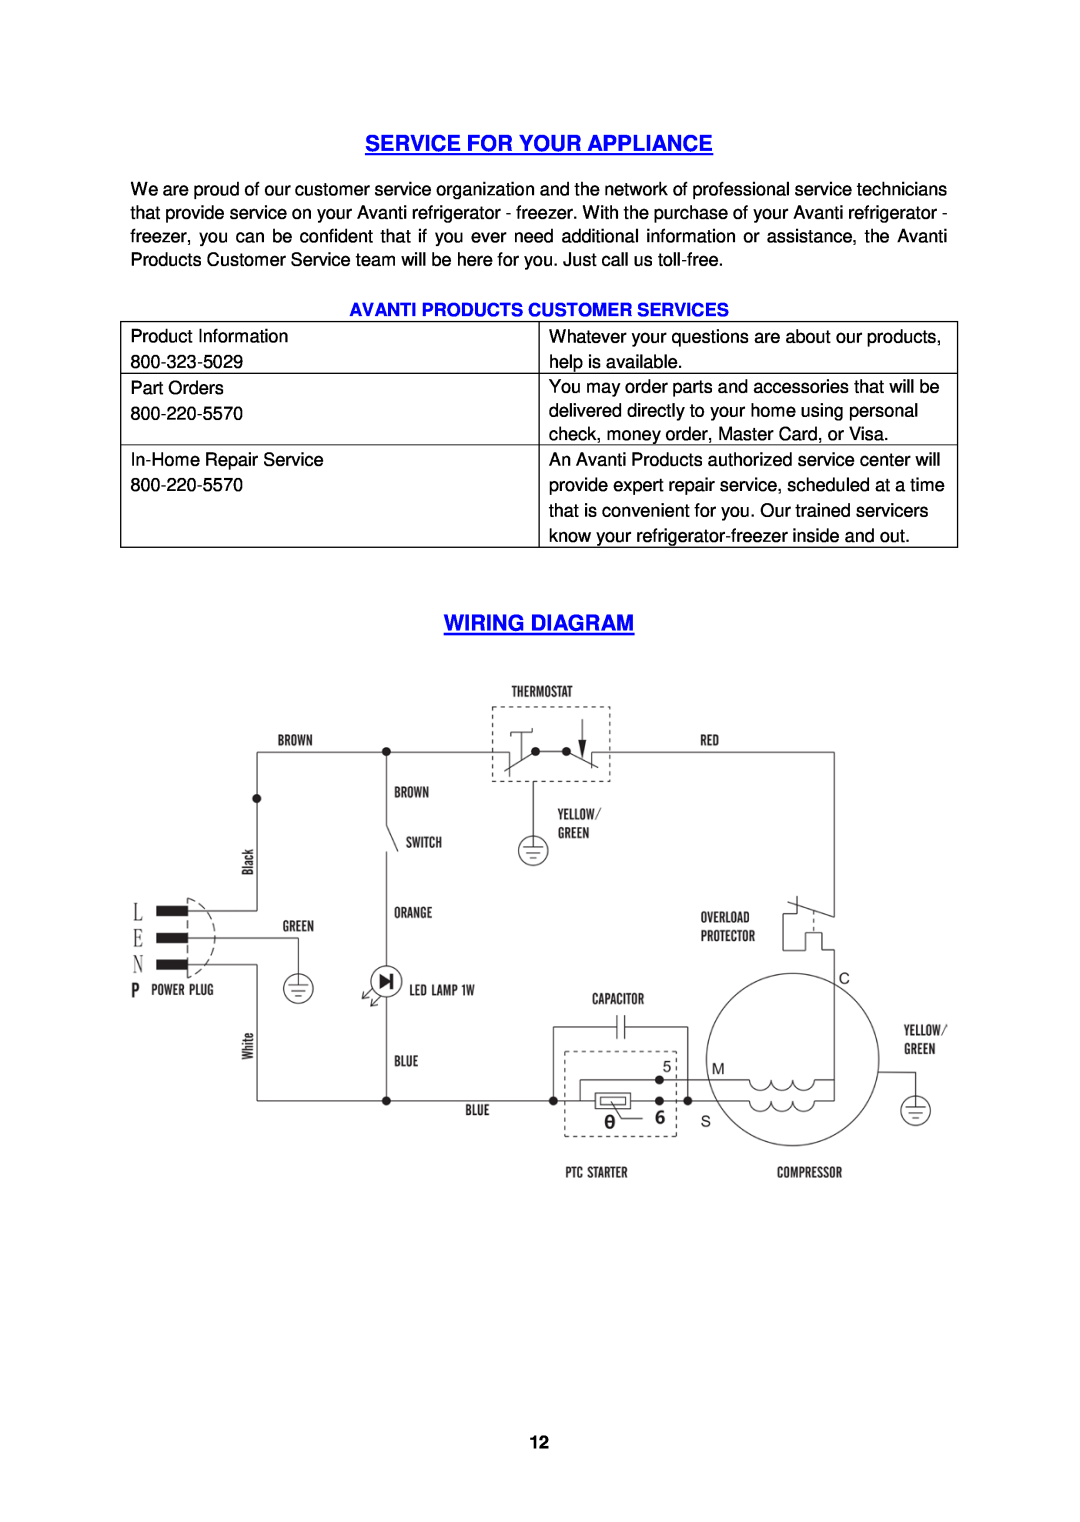 Avanti RMS550PS instruction manual Service For Your Appliance, Wiring Diagram, Avanti Products Customer Services 